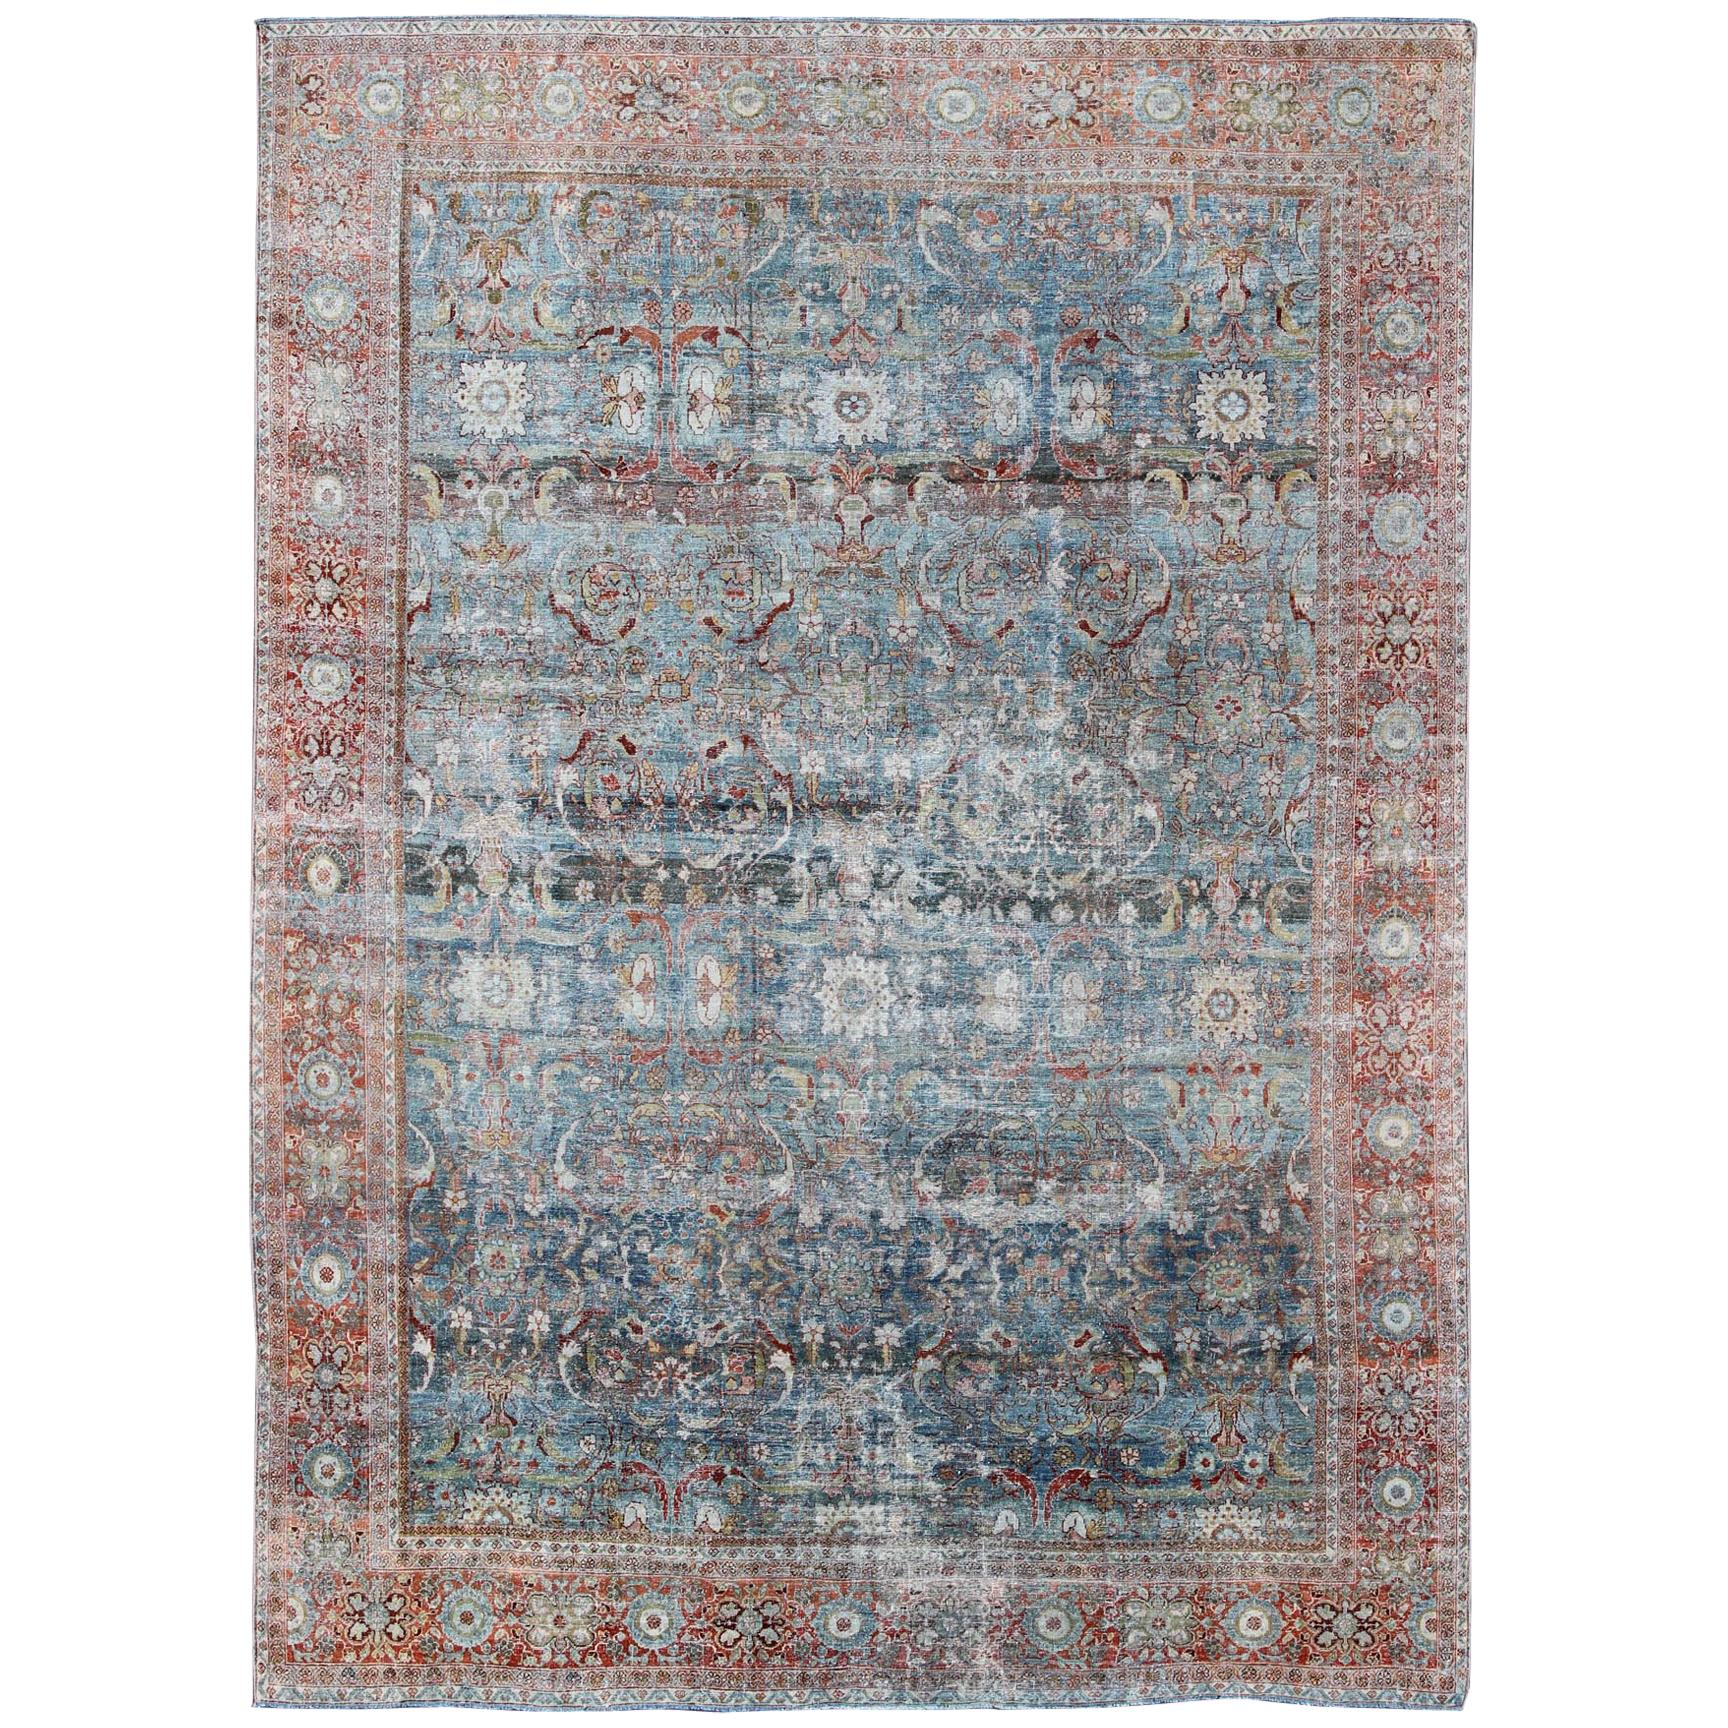 Antique Persian Sultanabad Mahal Rug with Geo-Floral Design in Blue Green & Red